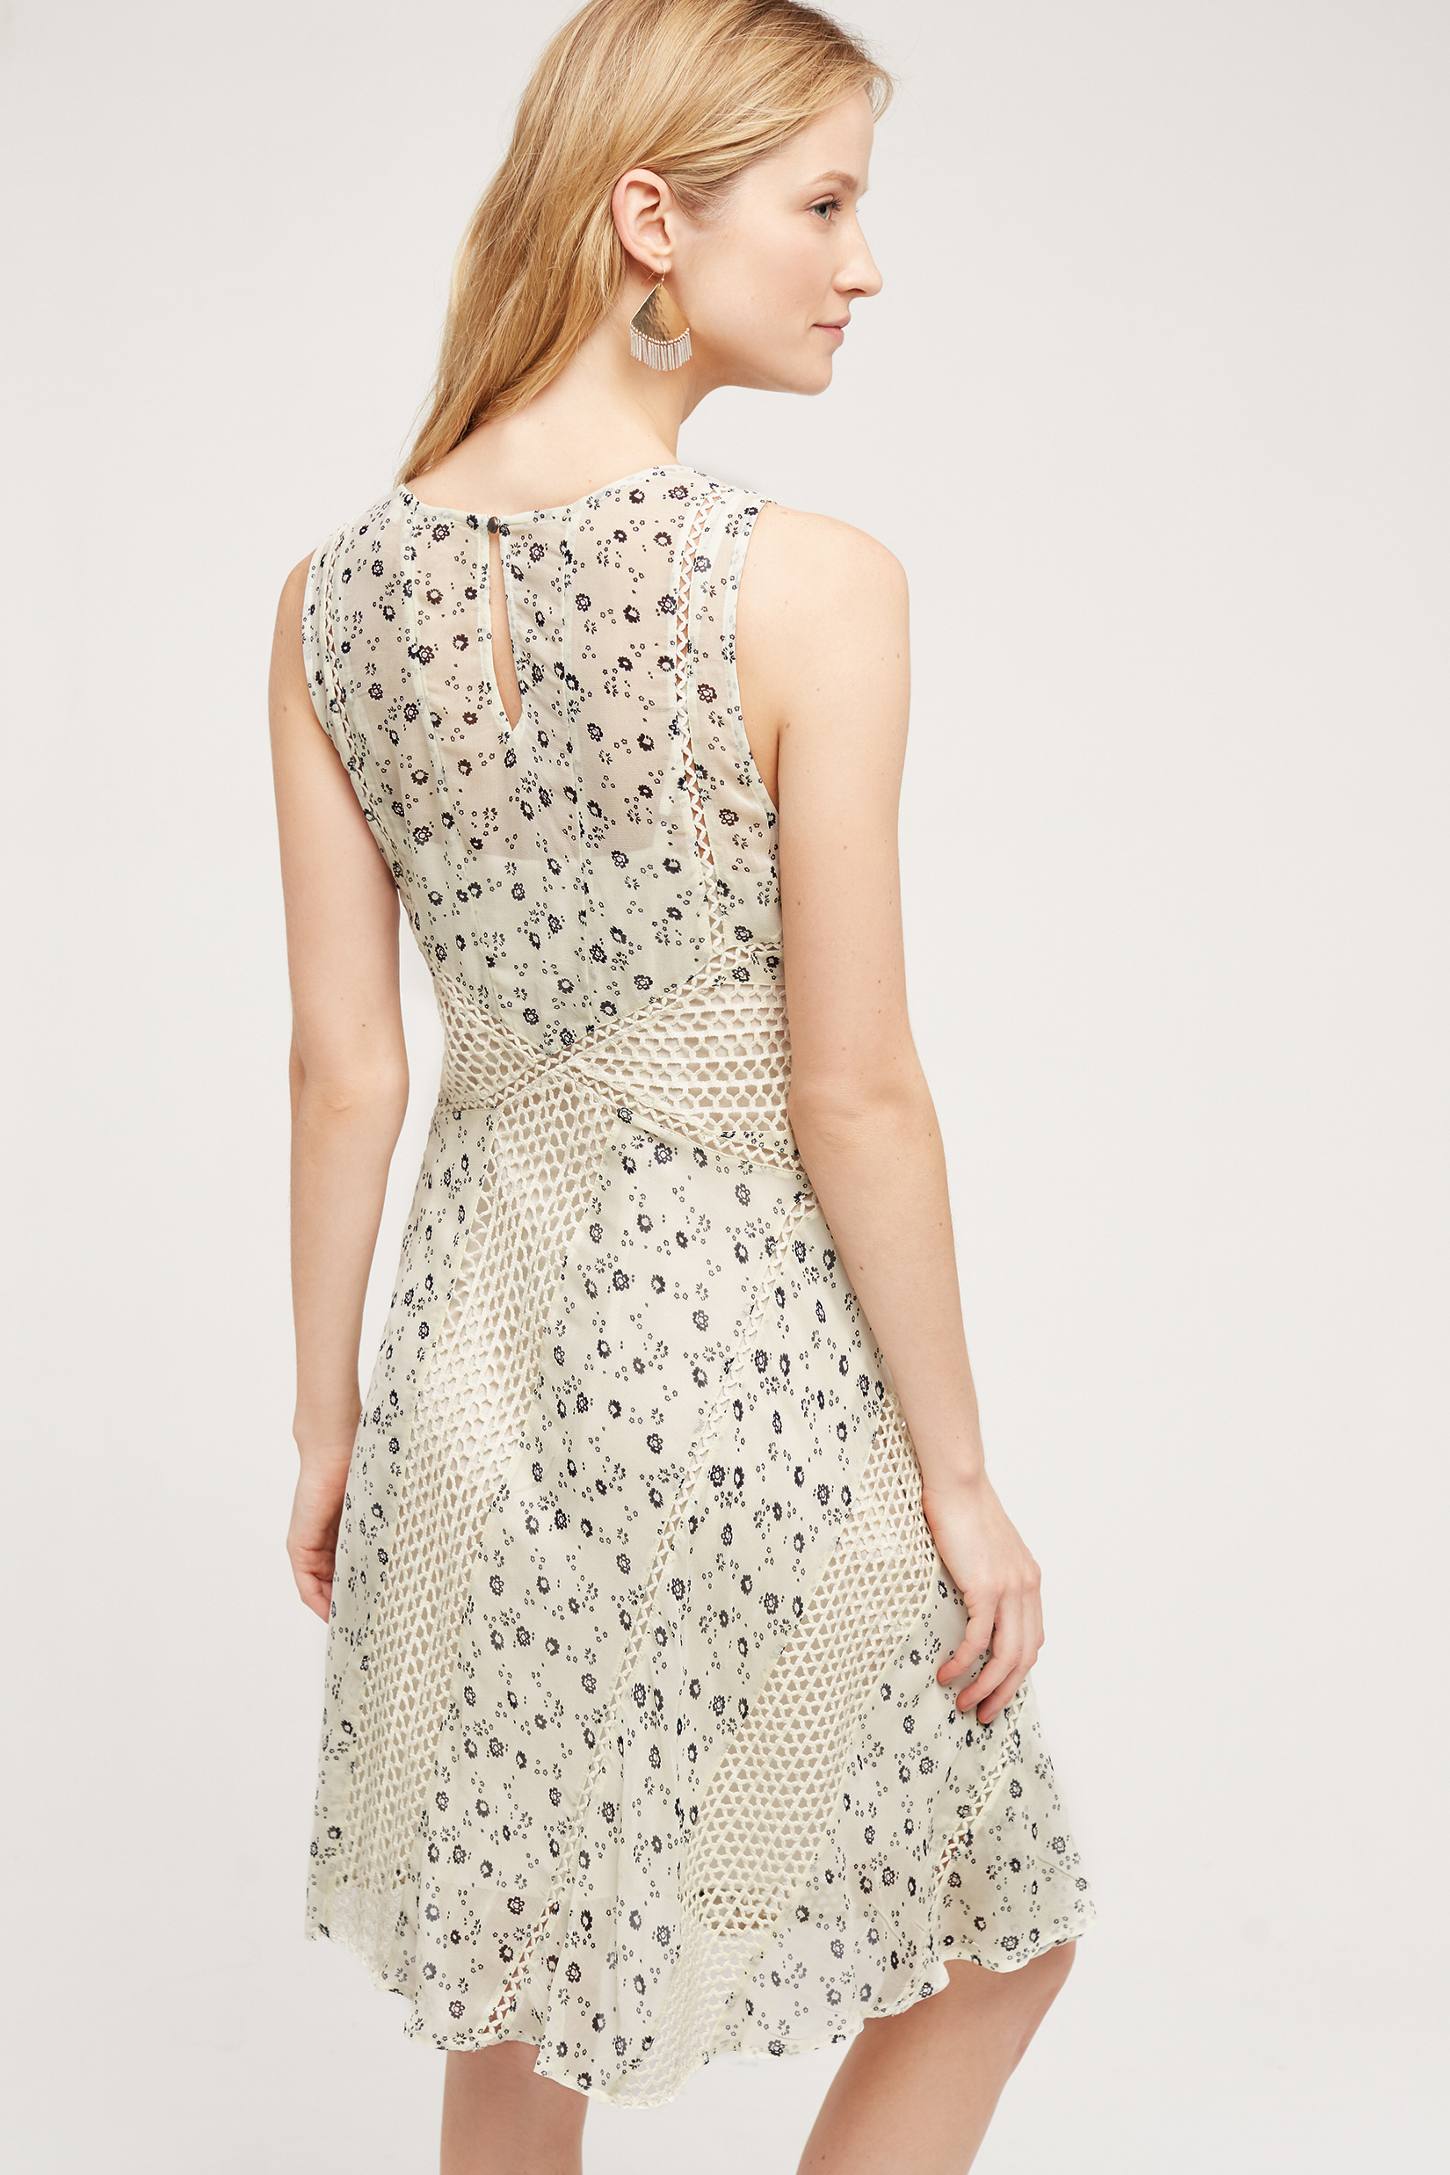 Windswept Lace Dress | Anthropologie